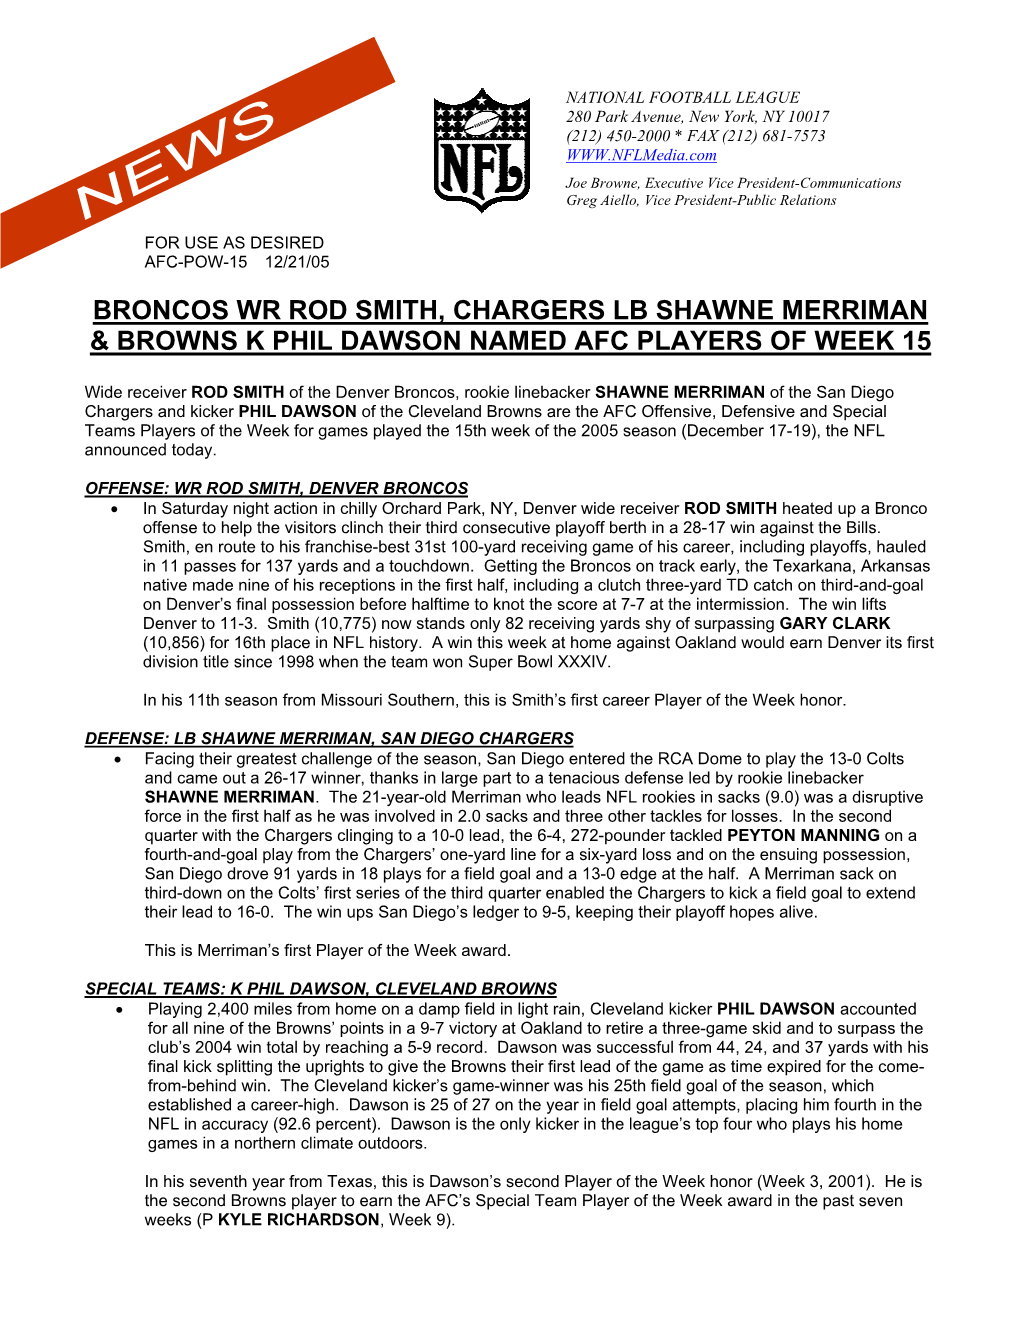 Broncos Wr Rod Smith, Chargers Lb Shawne Merriman & Browns K Phil Dawson Named Afc Players of Week 15